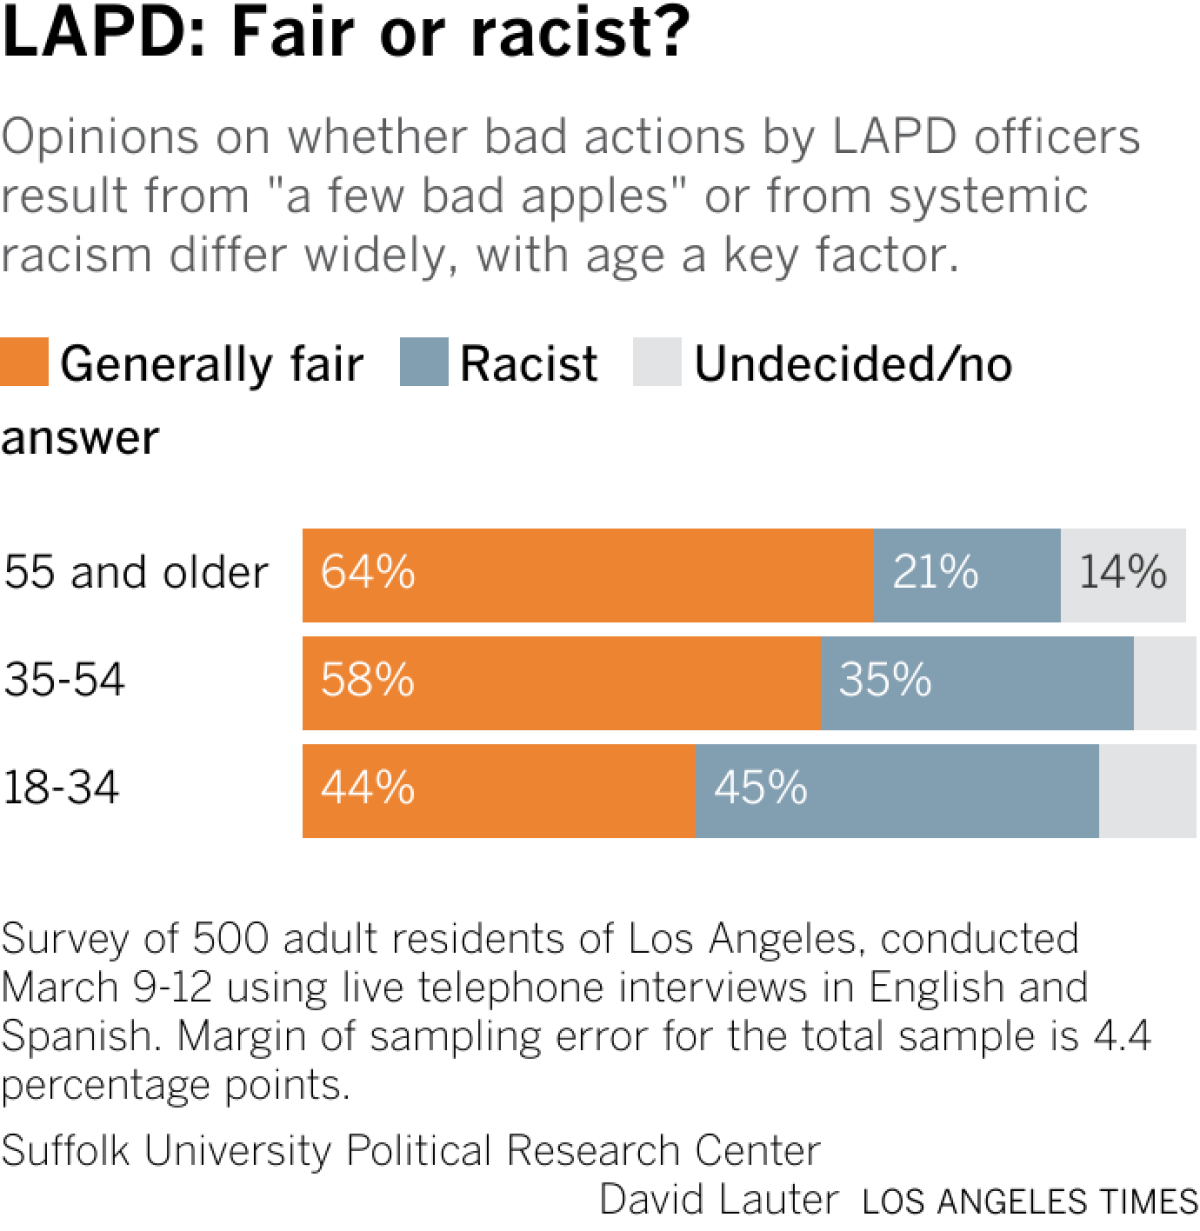 Bars show the share of LA residents who think the LAPD is generally fair in its treatment of people of different races or is racist, divided by age.